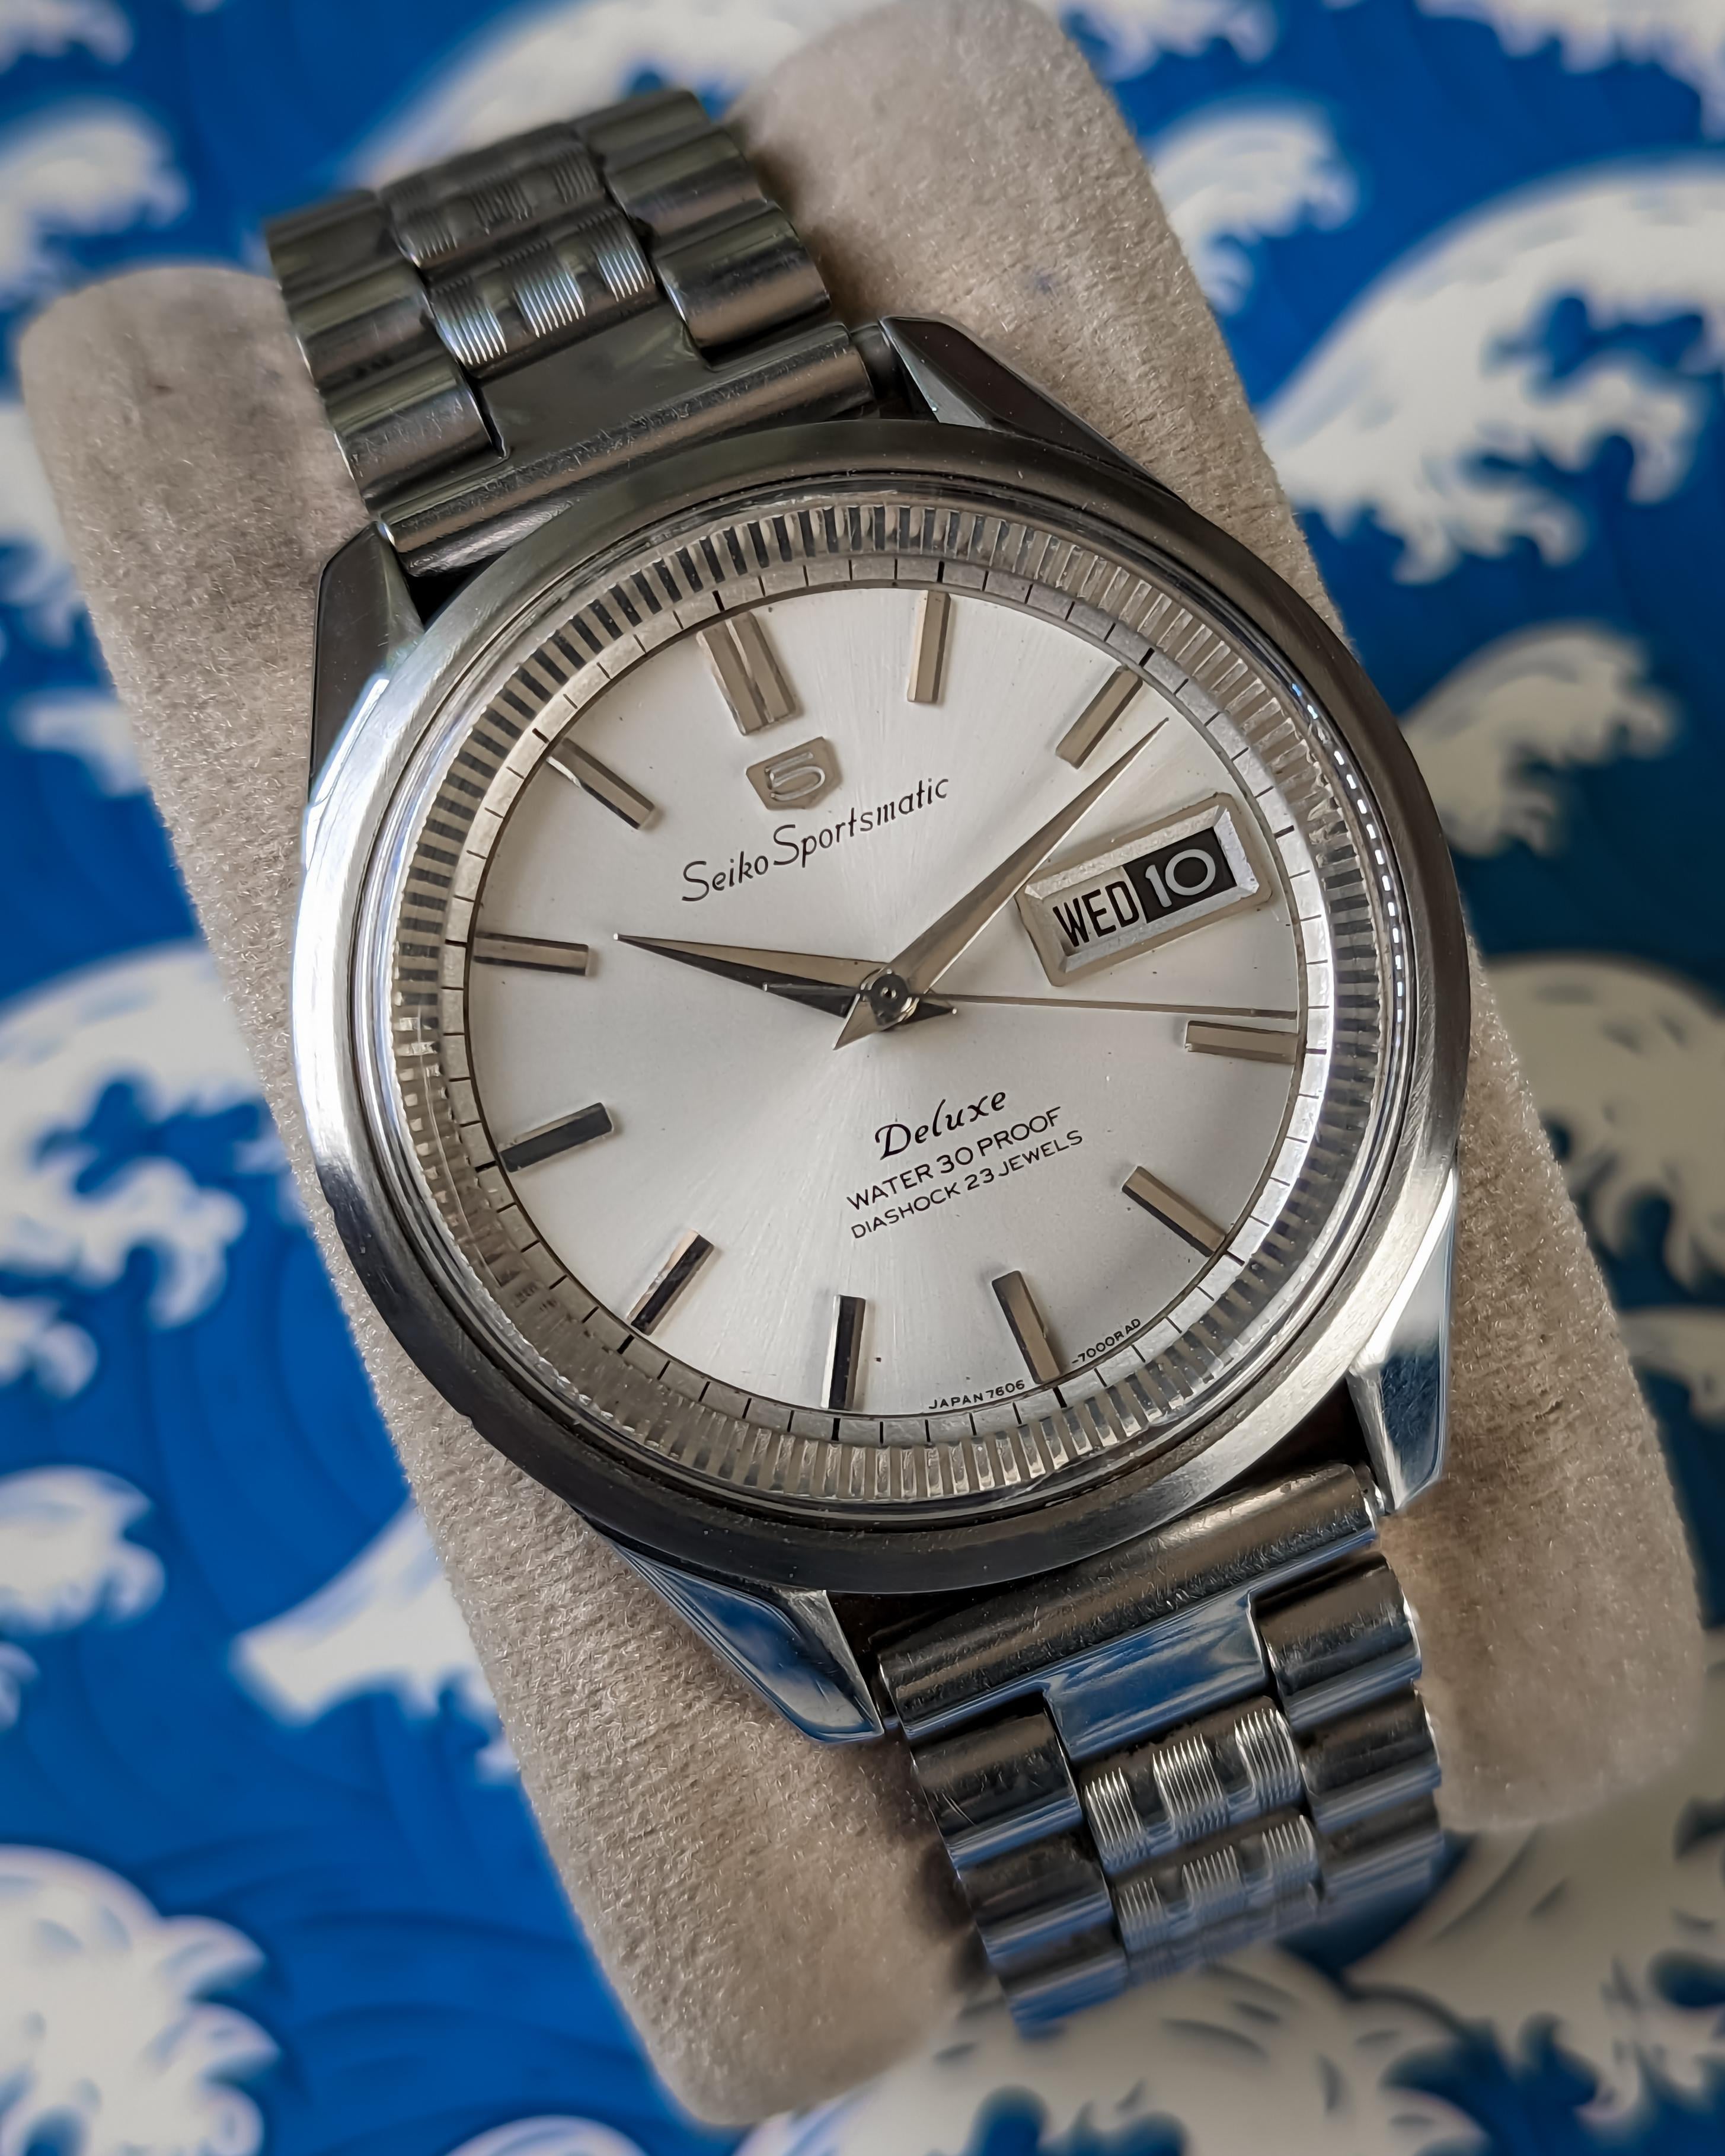 WTS] Vintage Seiko5 Sportsmatic Deluxe – 7606-7000 – 23 Jewels 